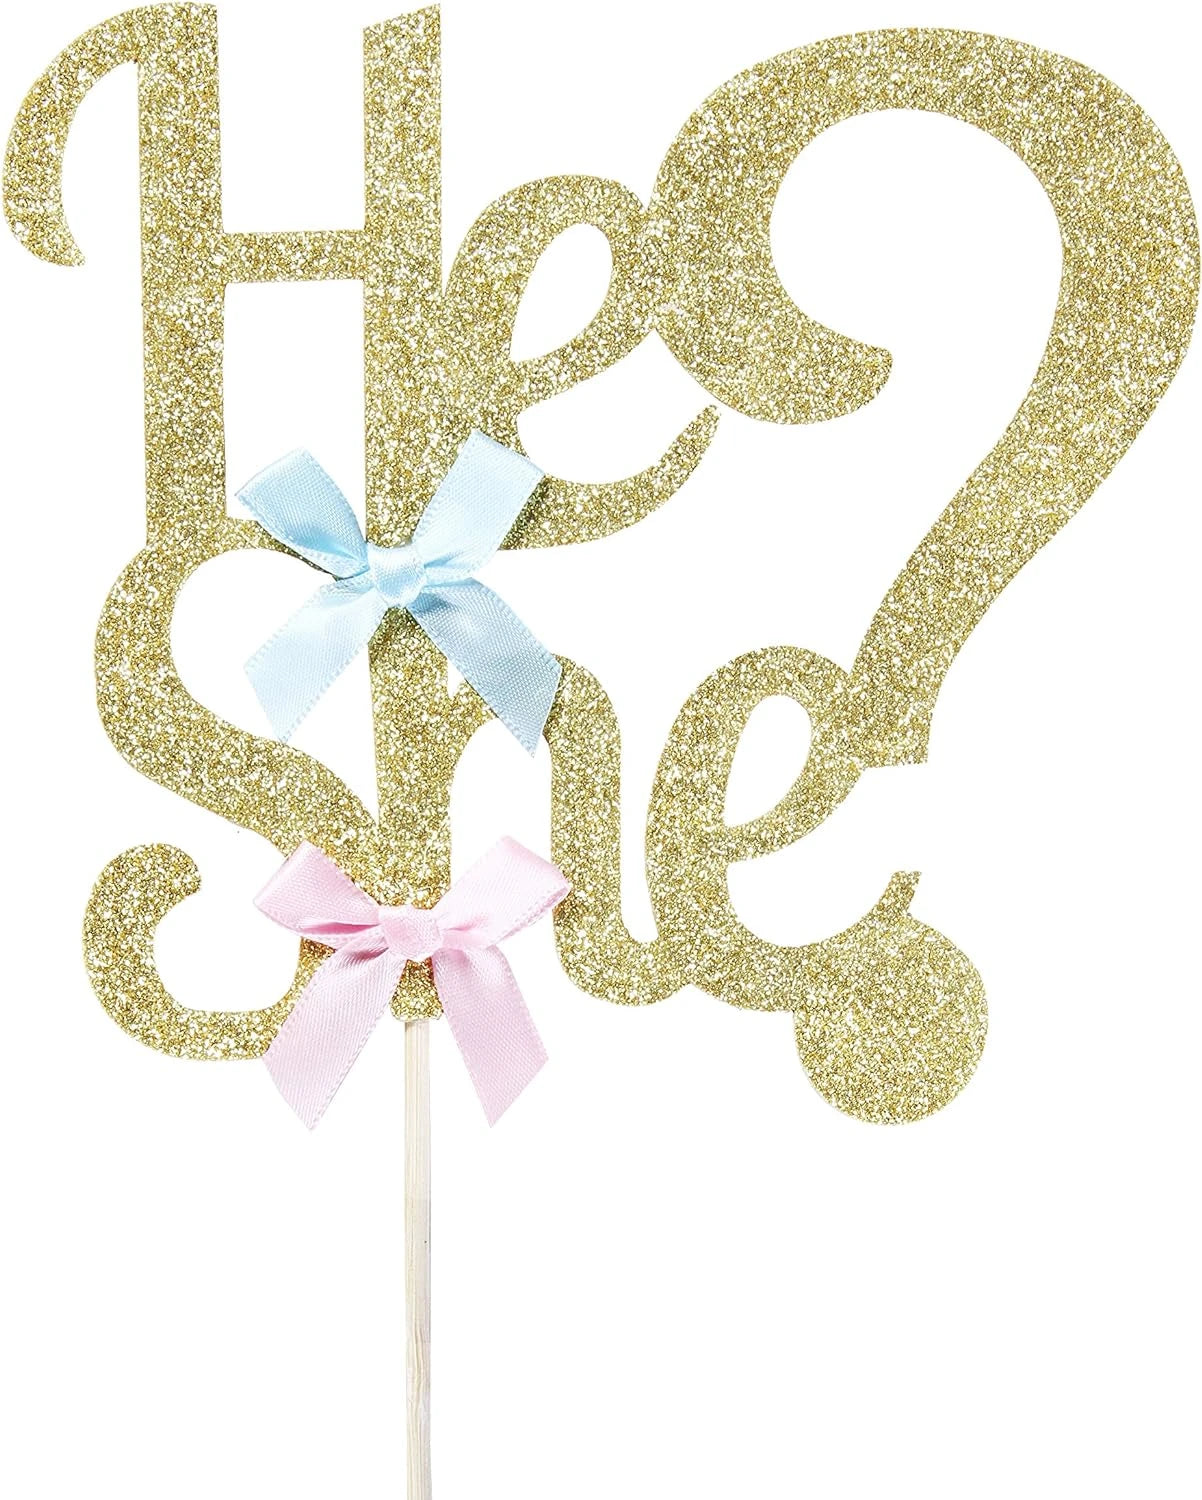 He Or She Gold Glitter Cake Topper for Gender Reveal Parties - Partyshakes Tableware